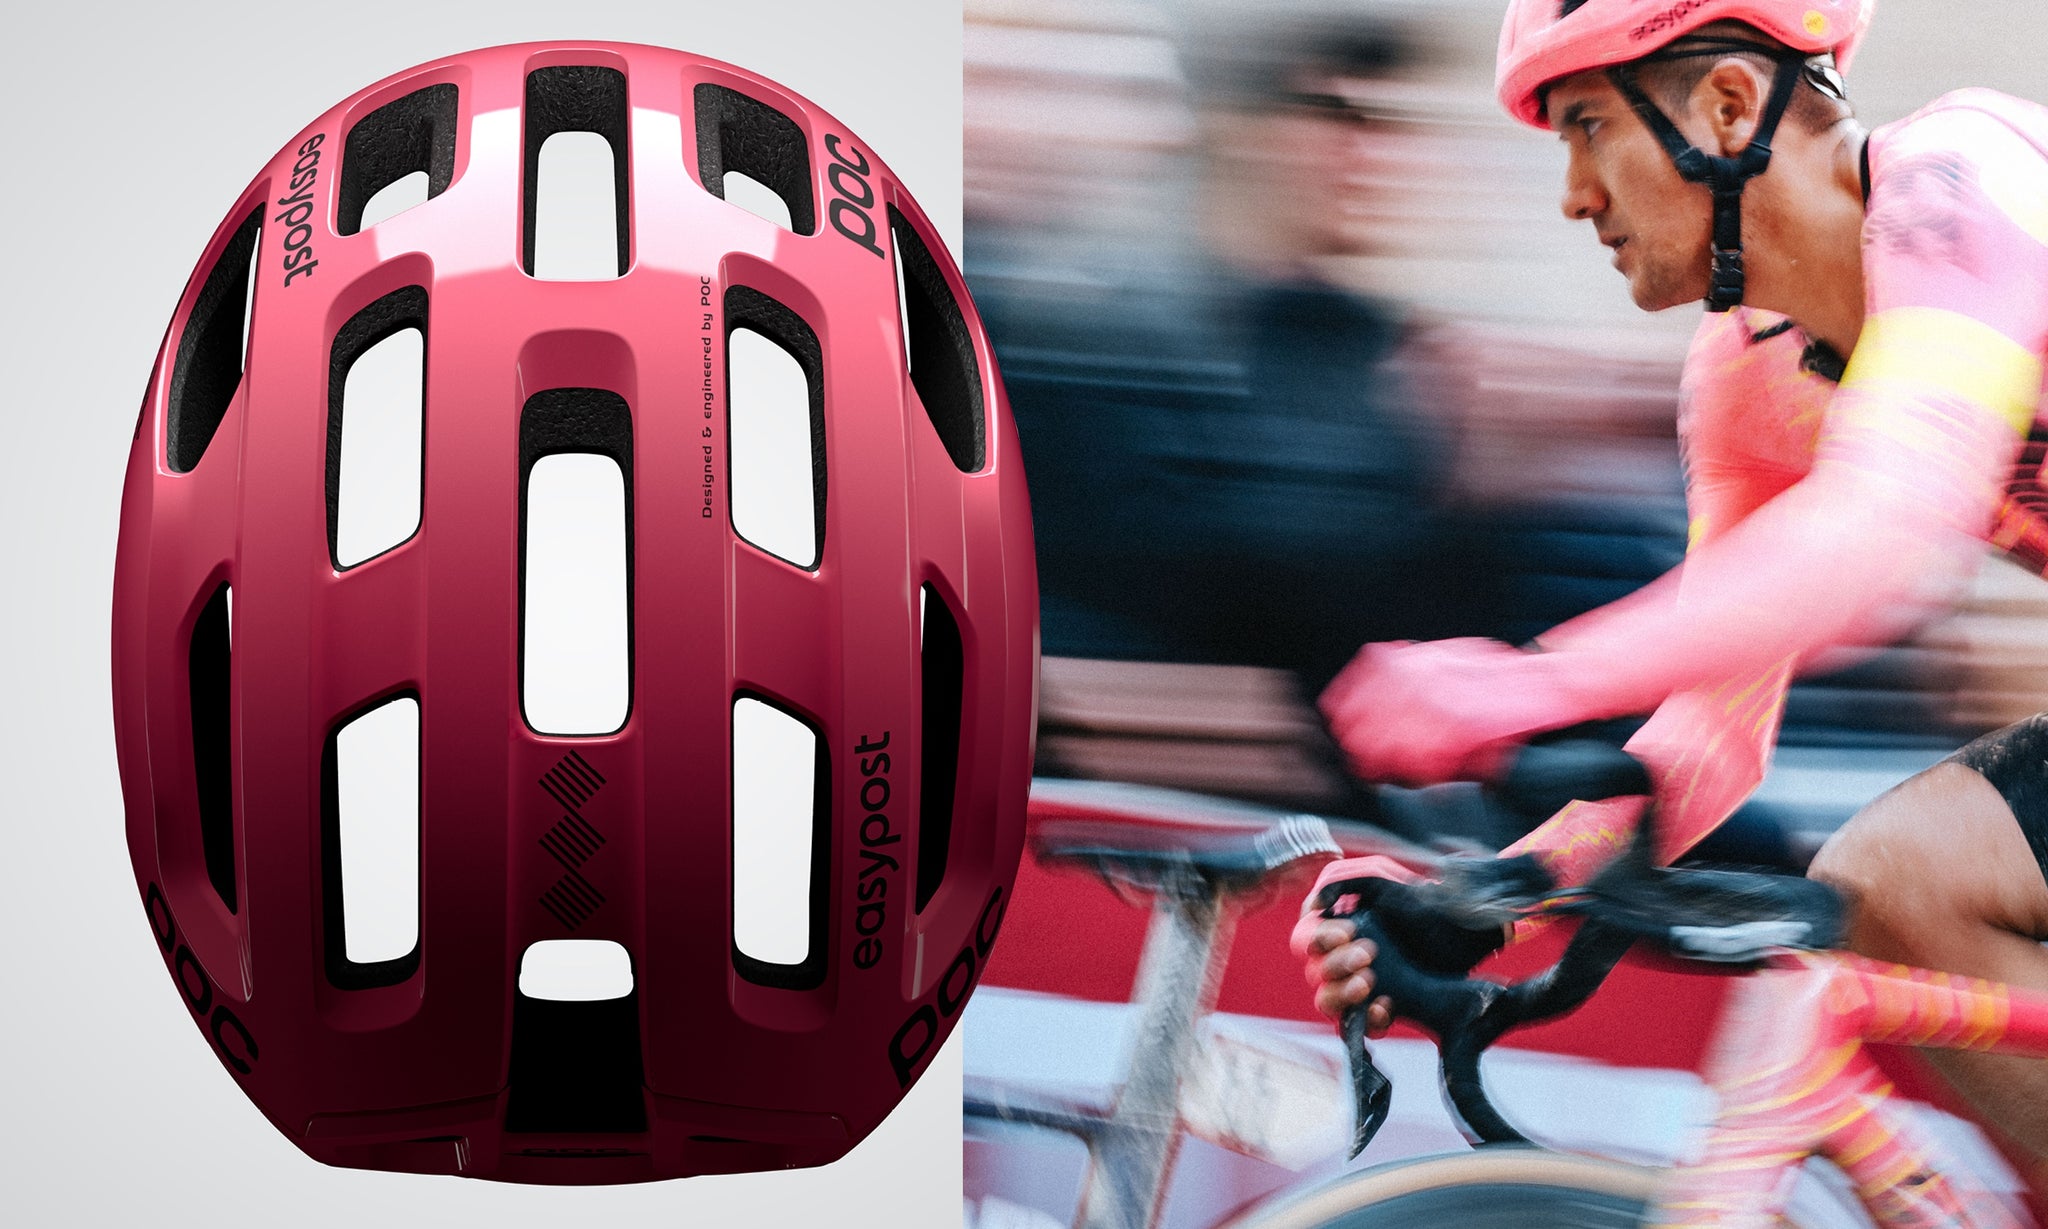 POC Ventral Air EF Team Edition: The Coolest Team Gets the Coolest Helmet